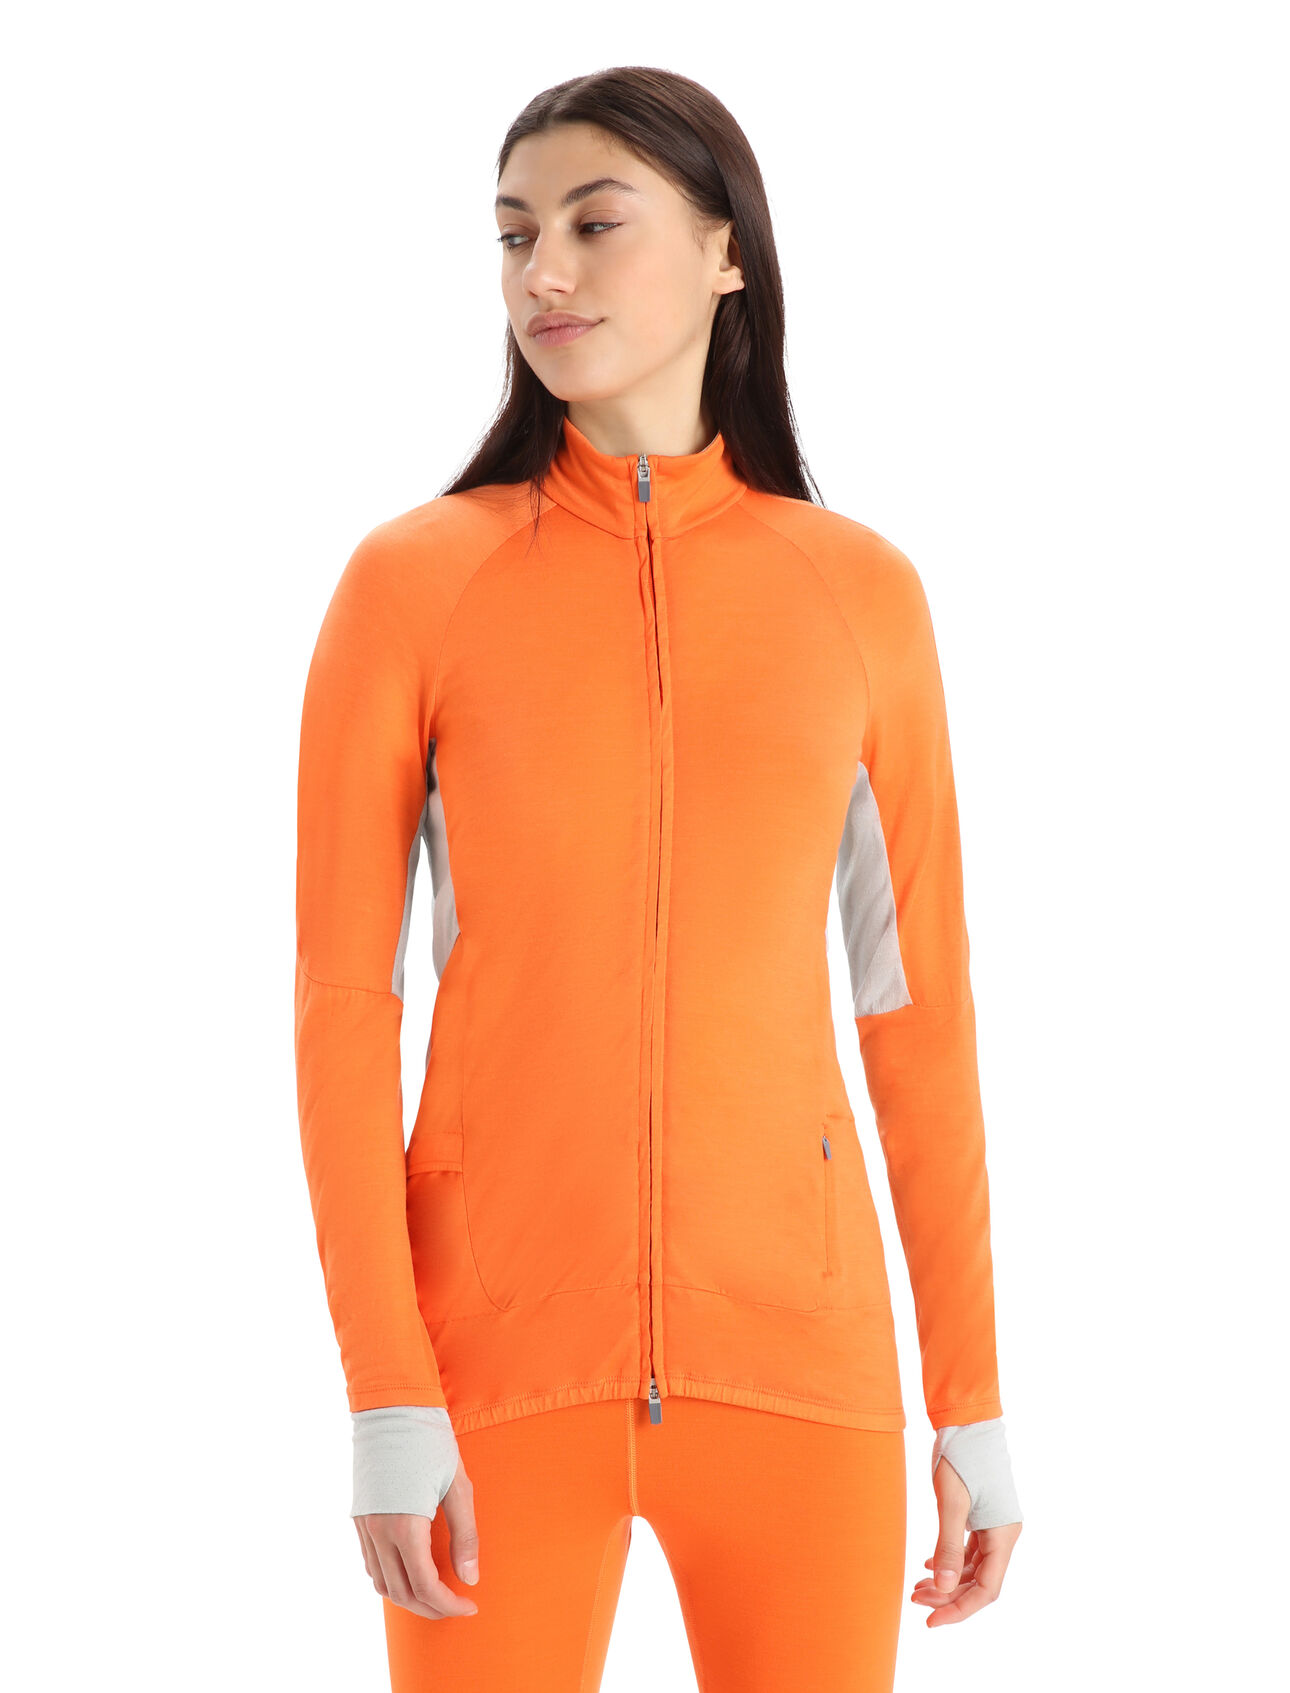 Womens ZoneKnit™ Merino Long Sleeve Zip A lightweight midlayer designed to balance warmth and breathability while running, biking or moving fast in the mountains, the ZoneKnit™ Long Sleeve Zip combines our Cool-Lite™ jersey fabric with strategic panels of eyelet mesh for enhanced airflow.